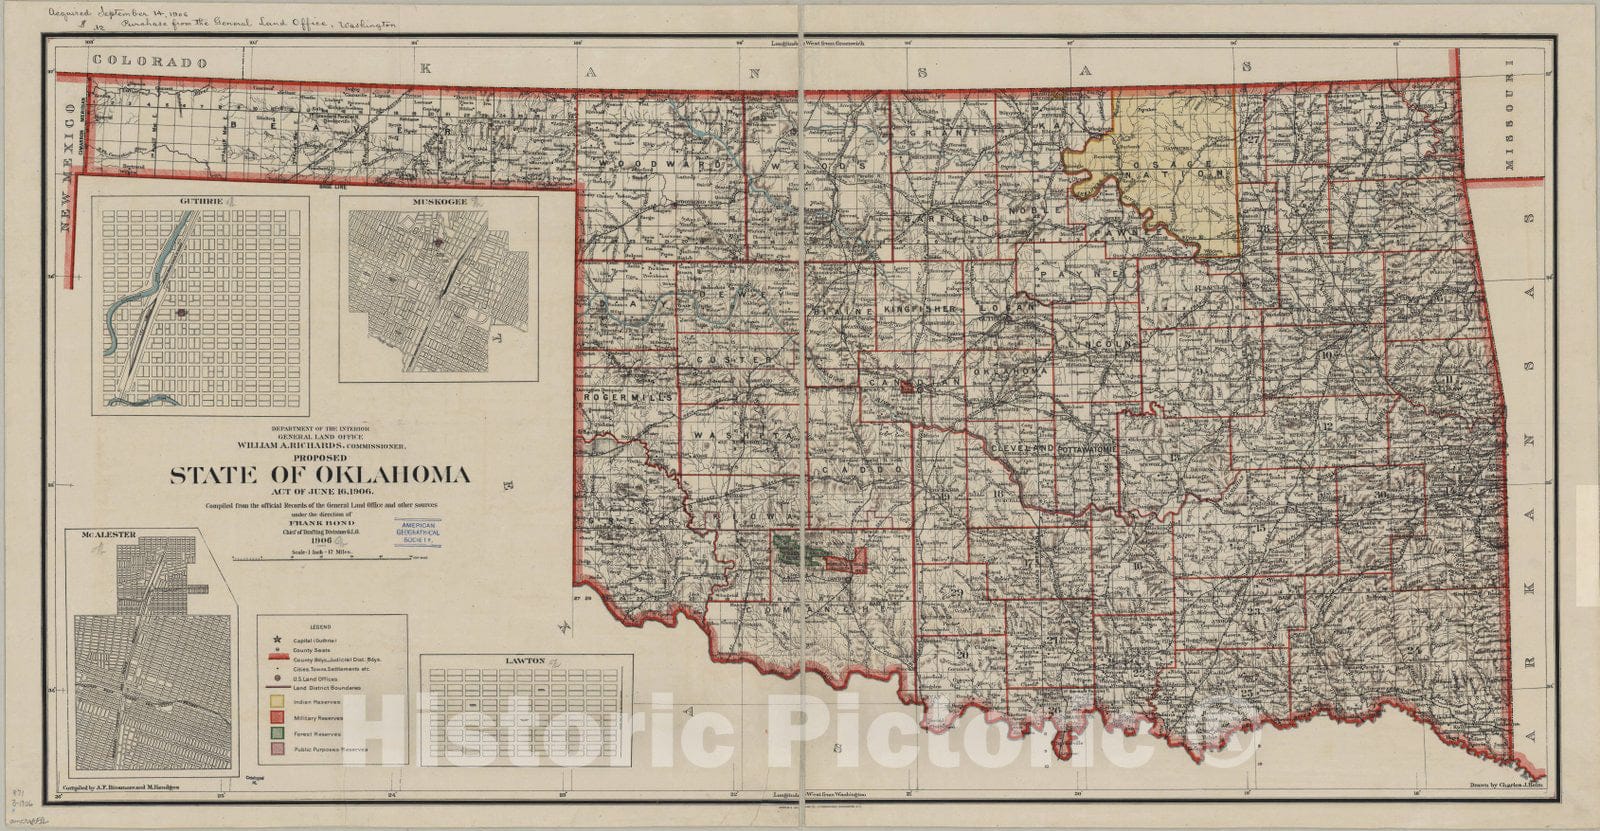 Map : Oklahoma 1906, Proposed state of Oklahoma : Act of June 16, 1906 , Antique Vintage Reproduction